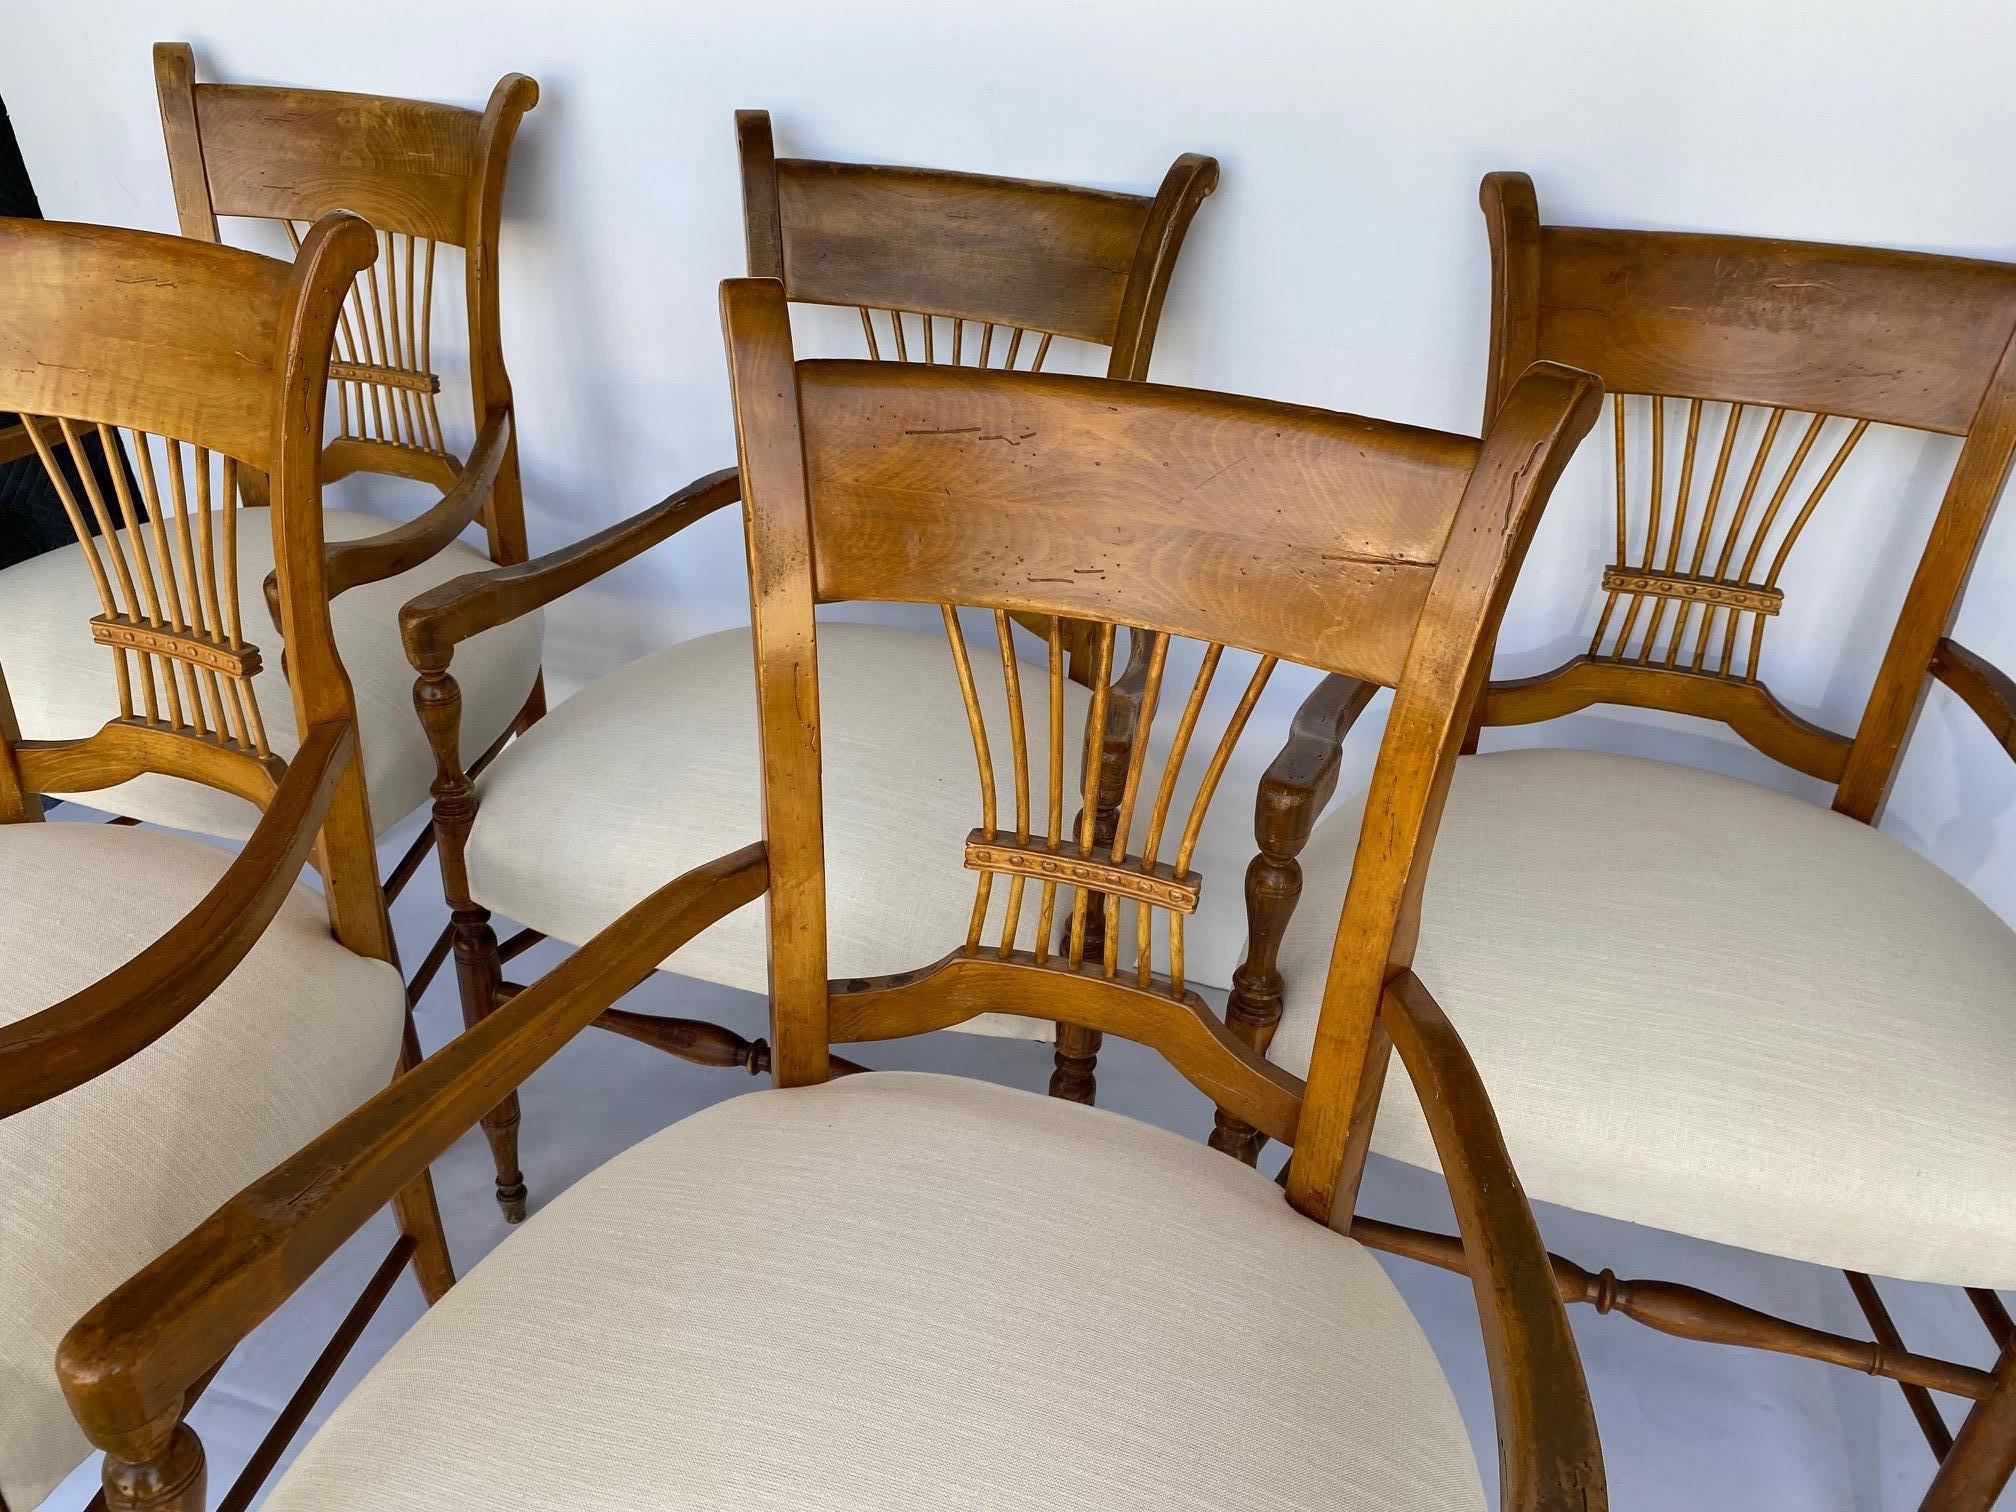 Italian provincial-style set of six armchairs. The seats are covered in linen.